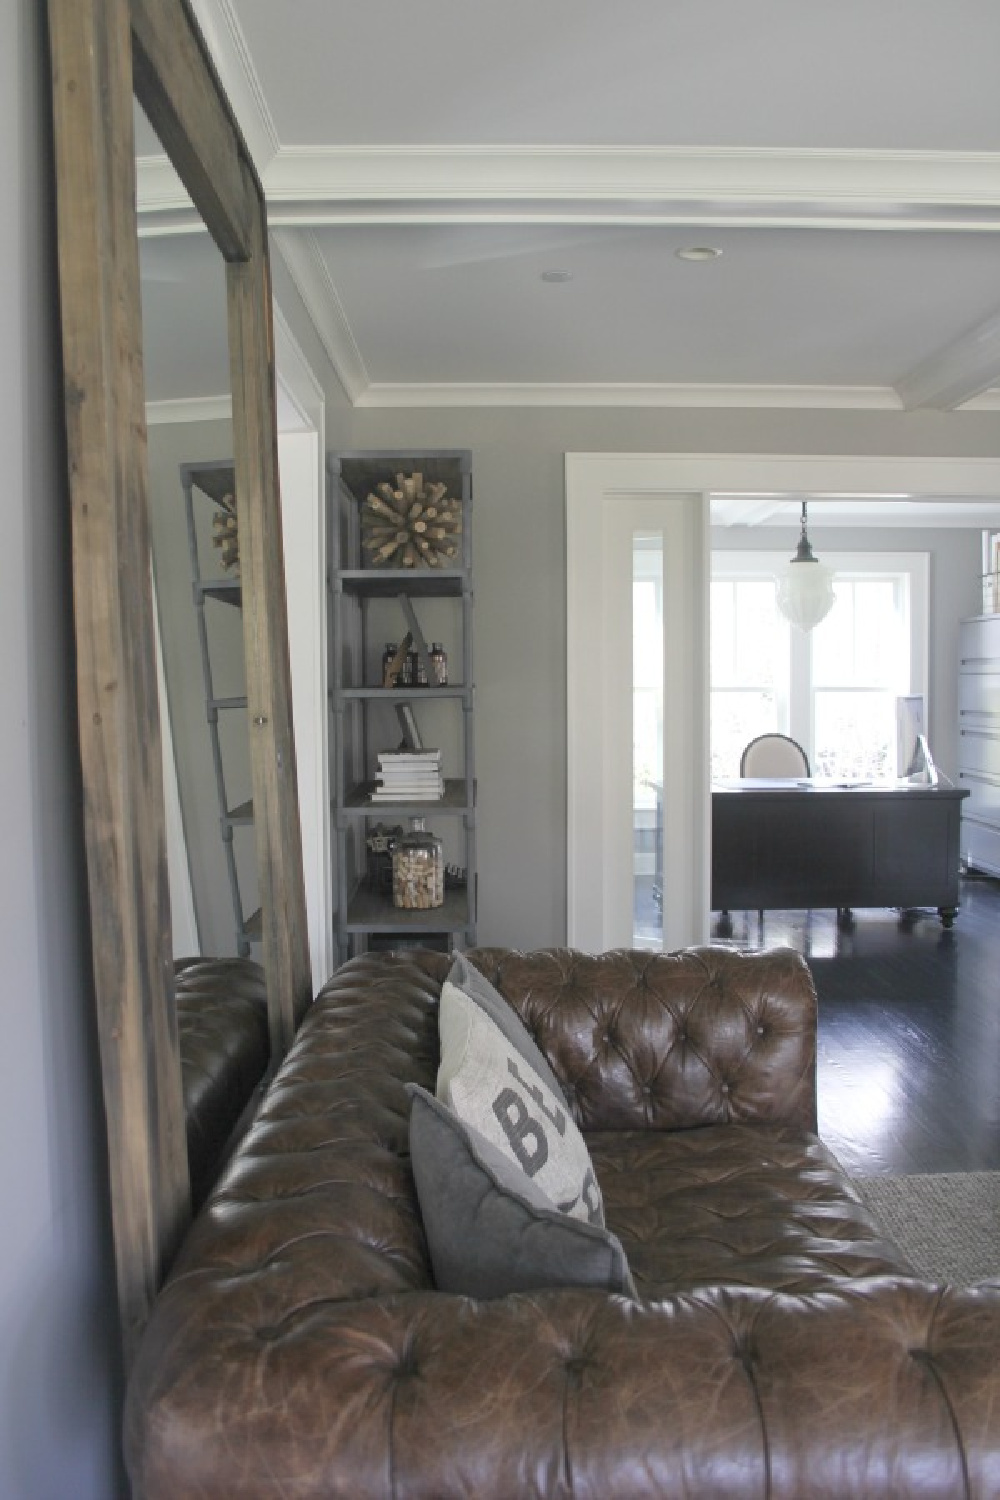 Chesterfield sofa in a neutral living room with rustic accents and Stonington Gray on walls.